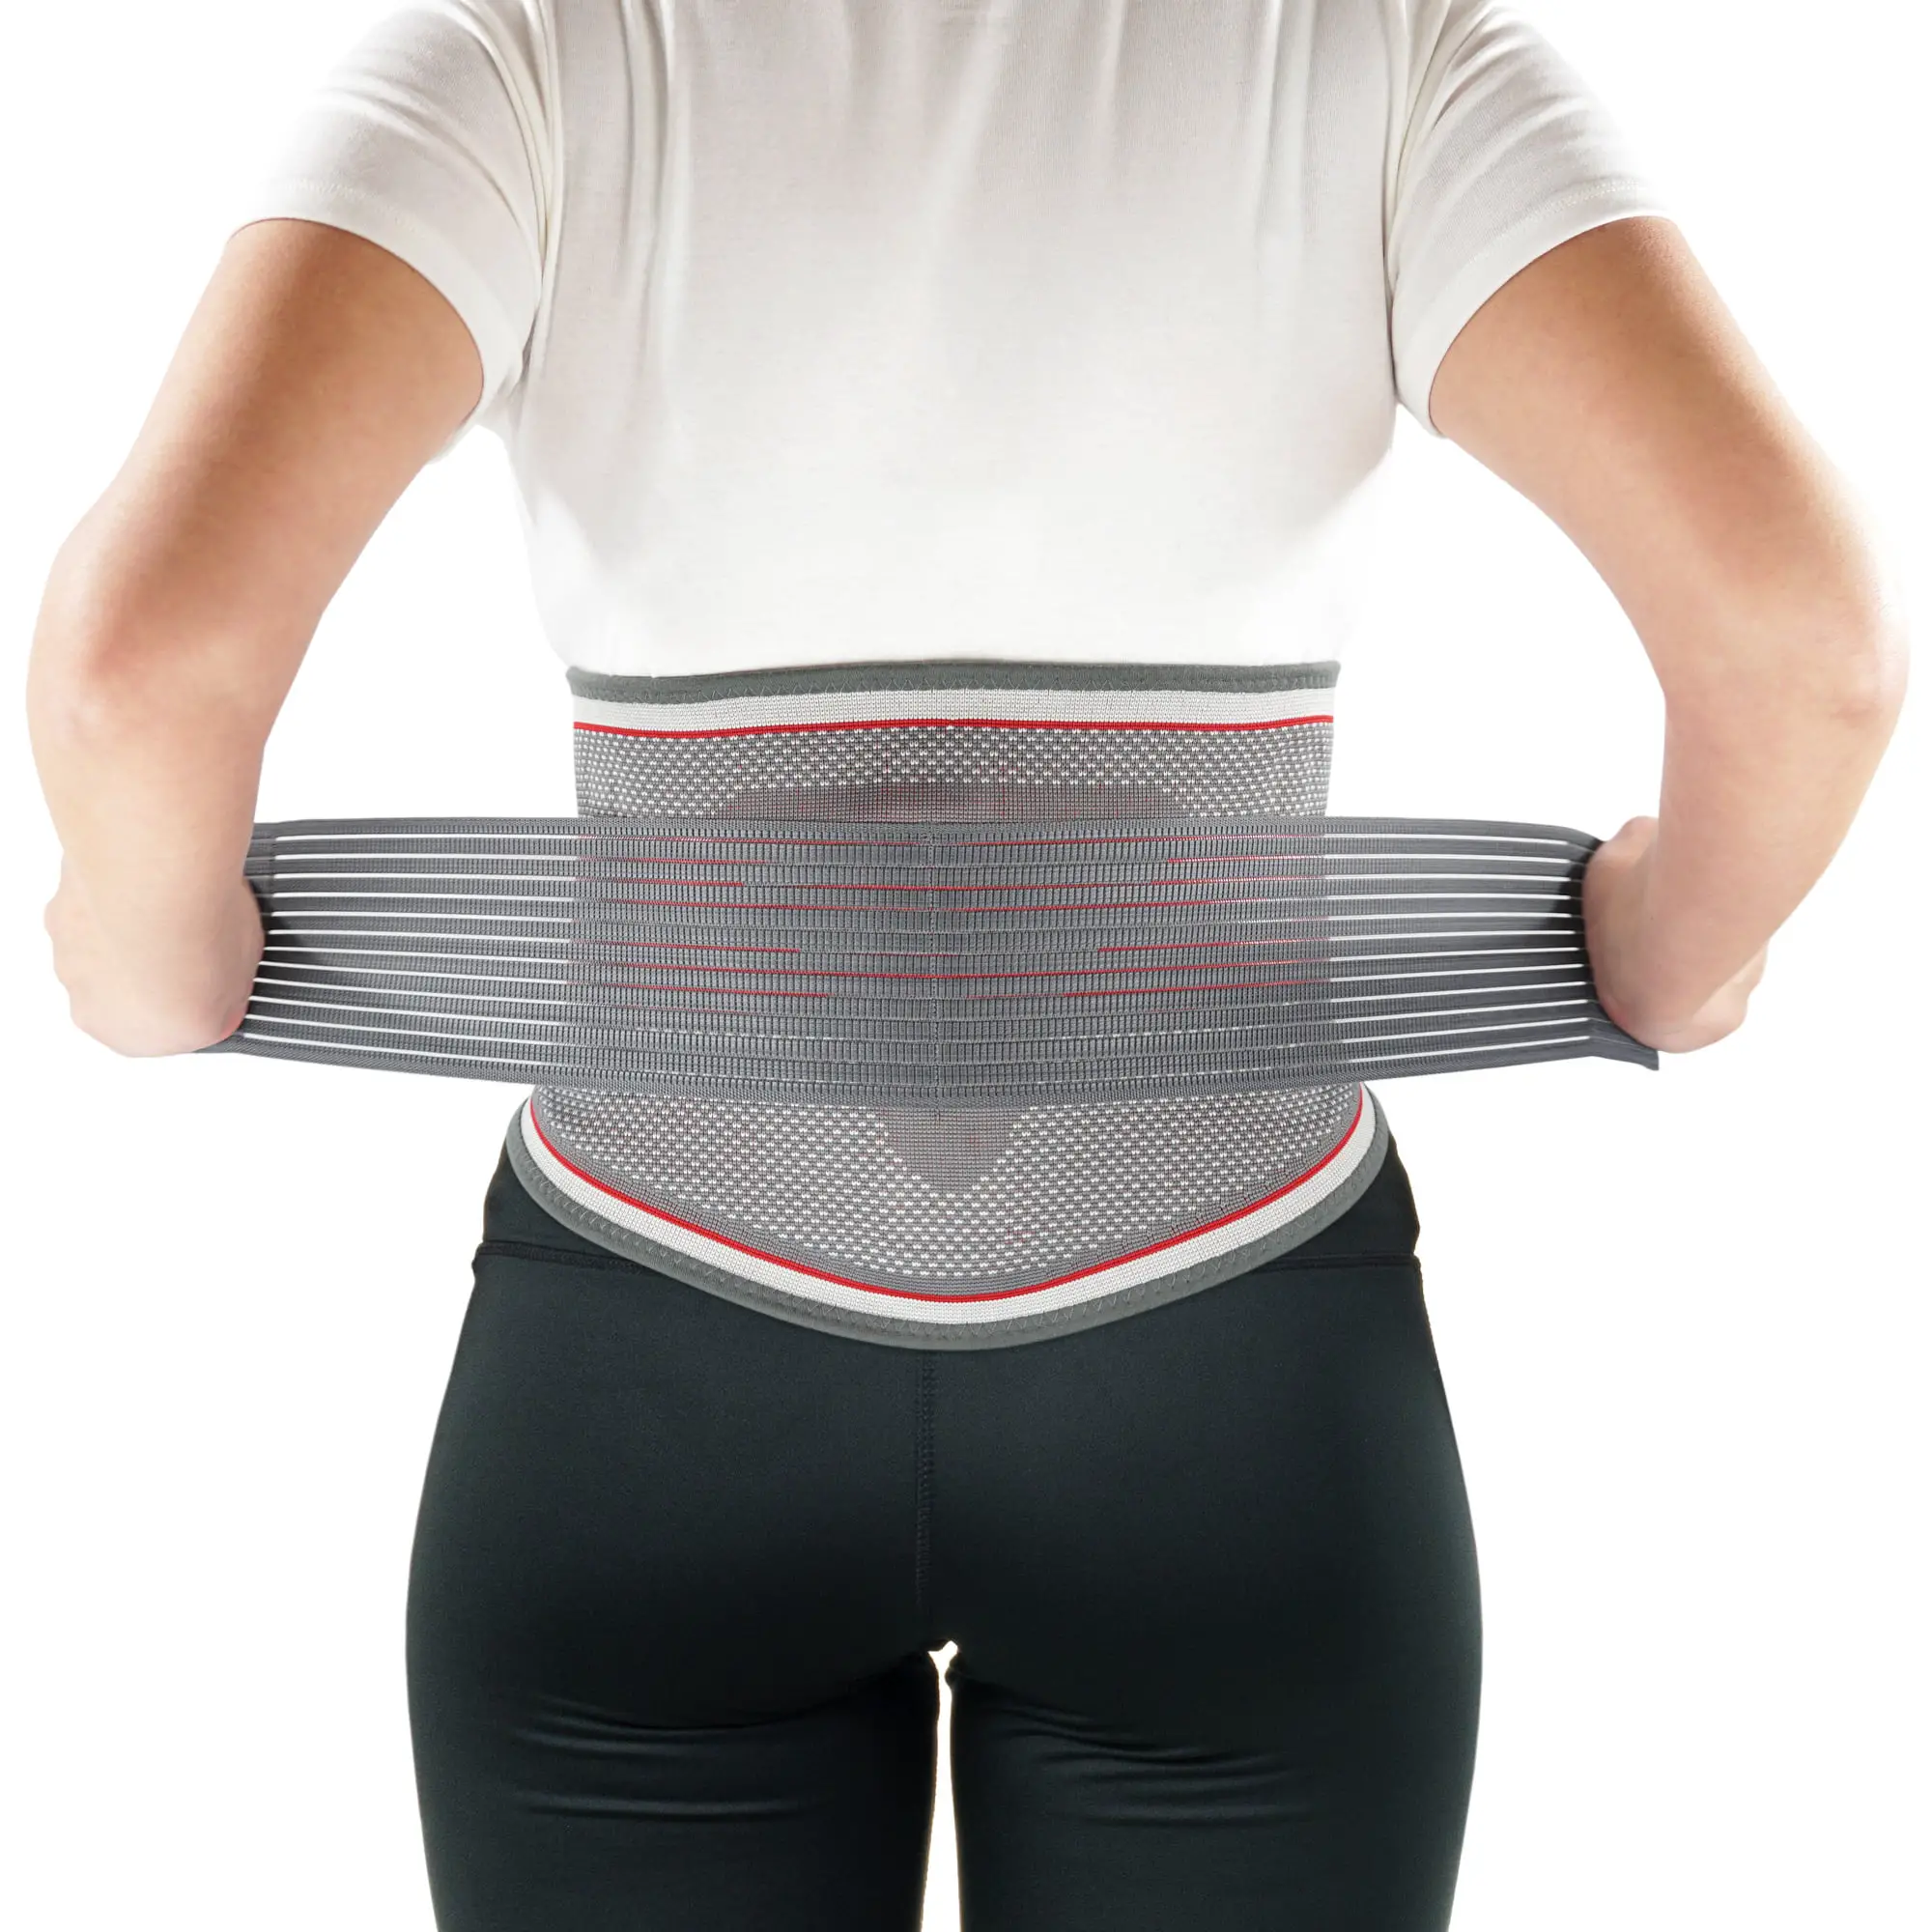 ORTONYX Back Brace Lumbar Support Belt with Removable Lumbar Pad for ...